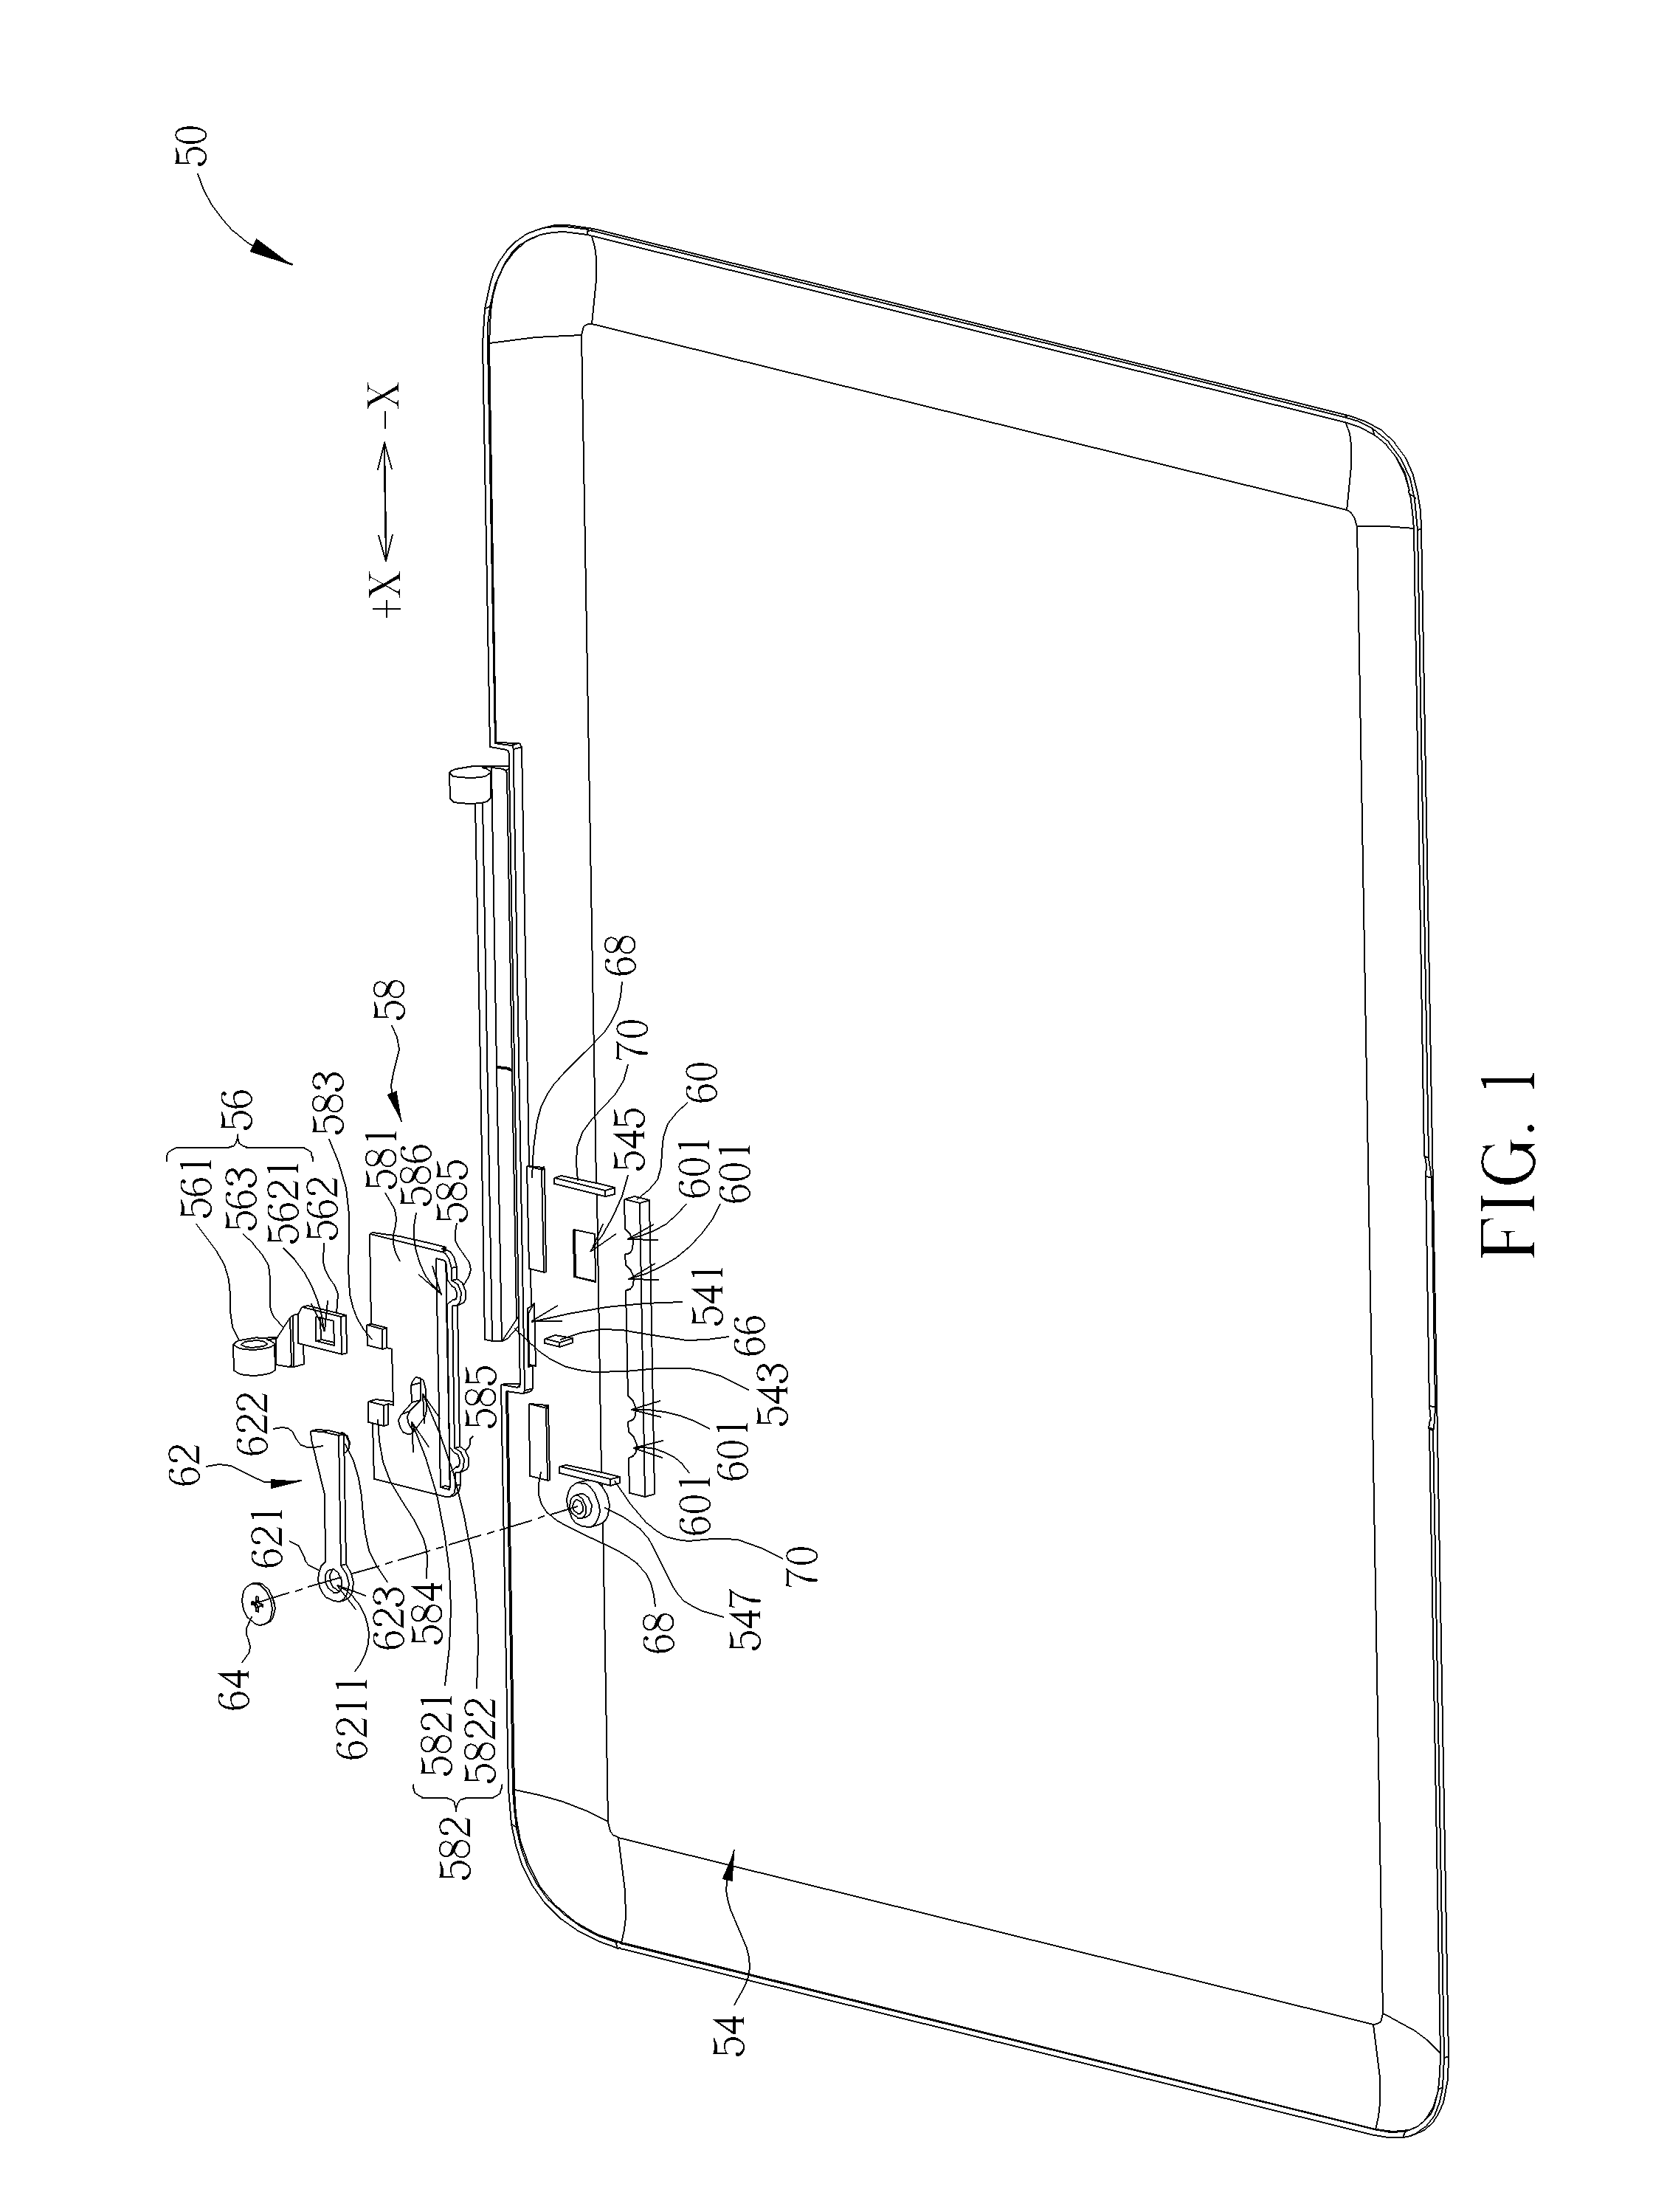 Fixing mechanism for fixing an accessory on a portable electronic device